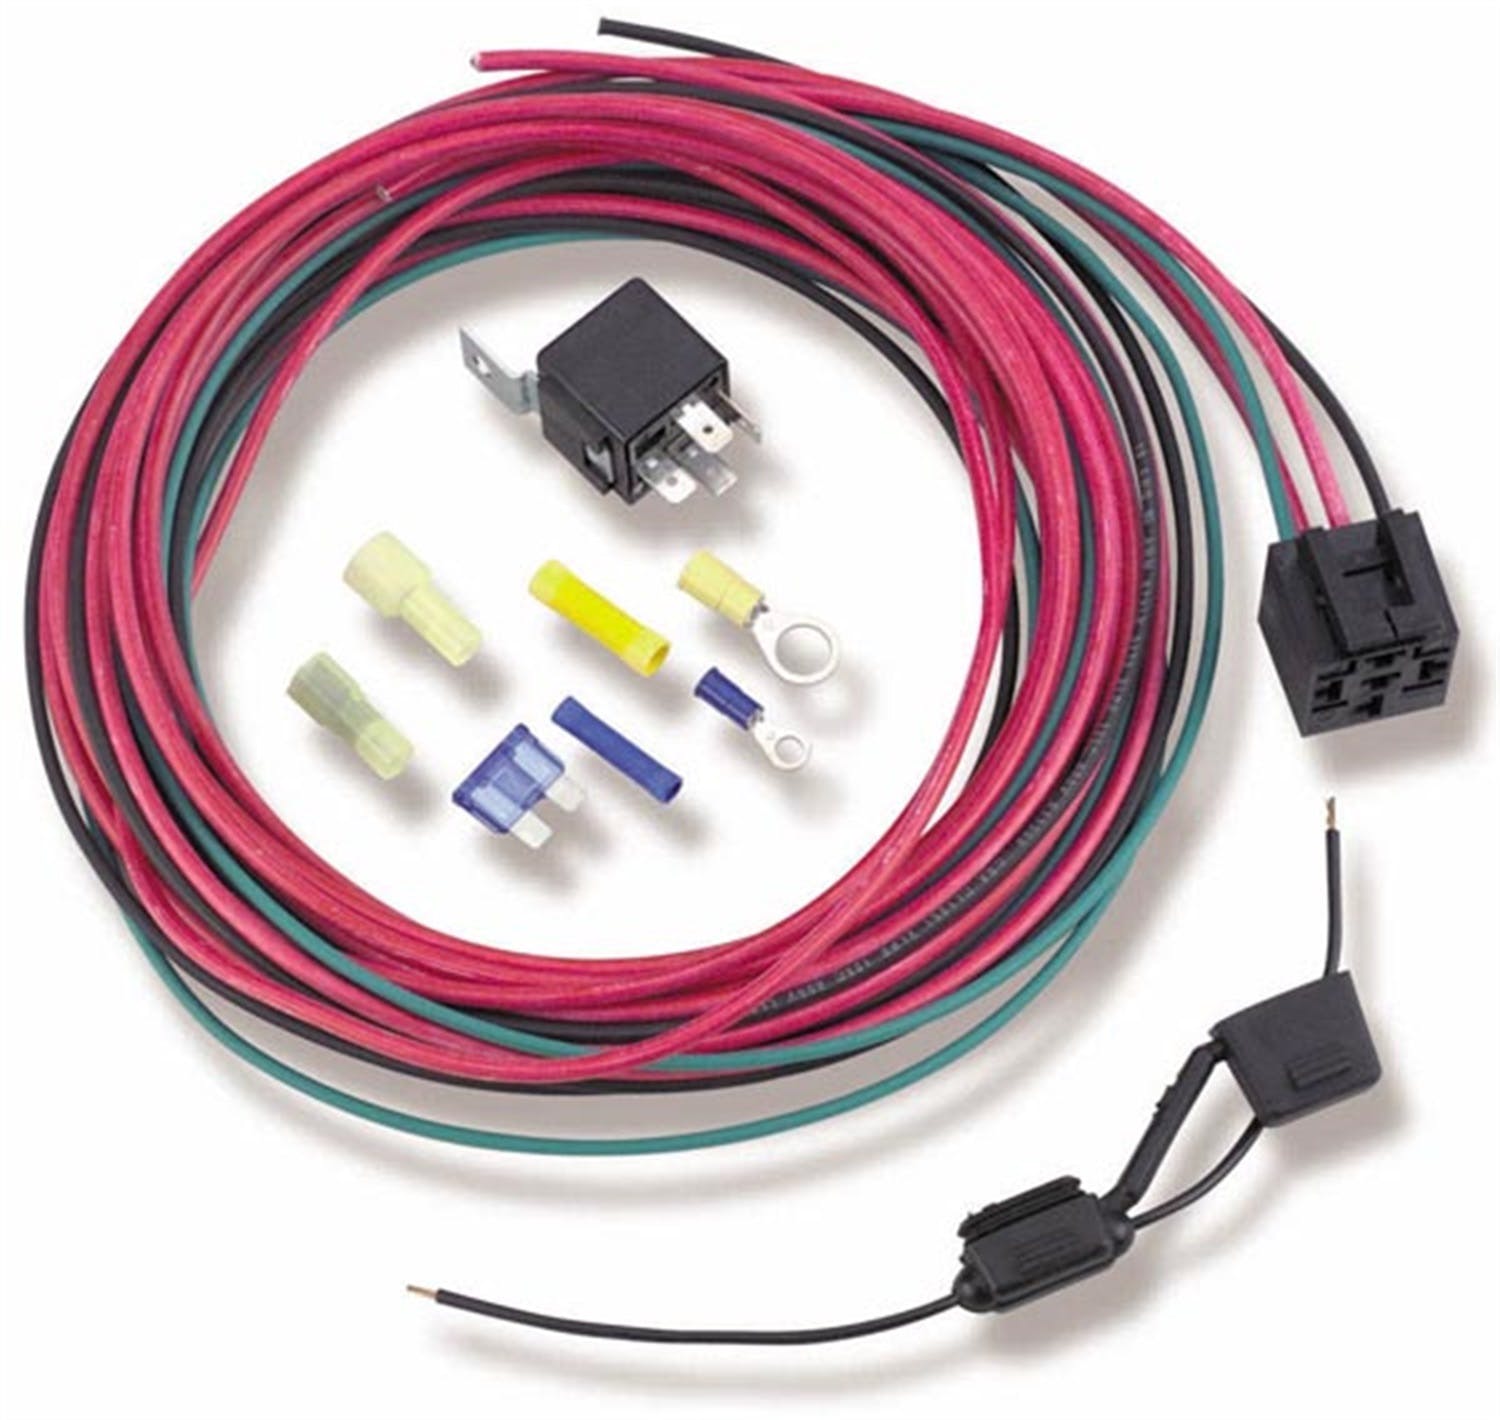 Holley 12-753 FUEL PUMP RELAY KIT